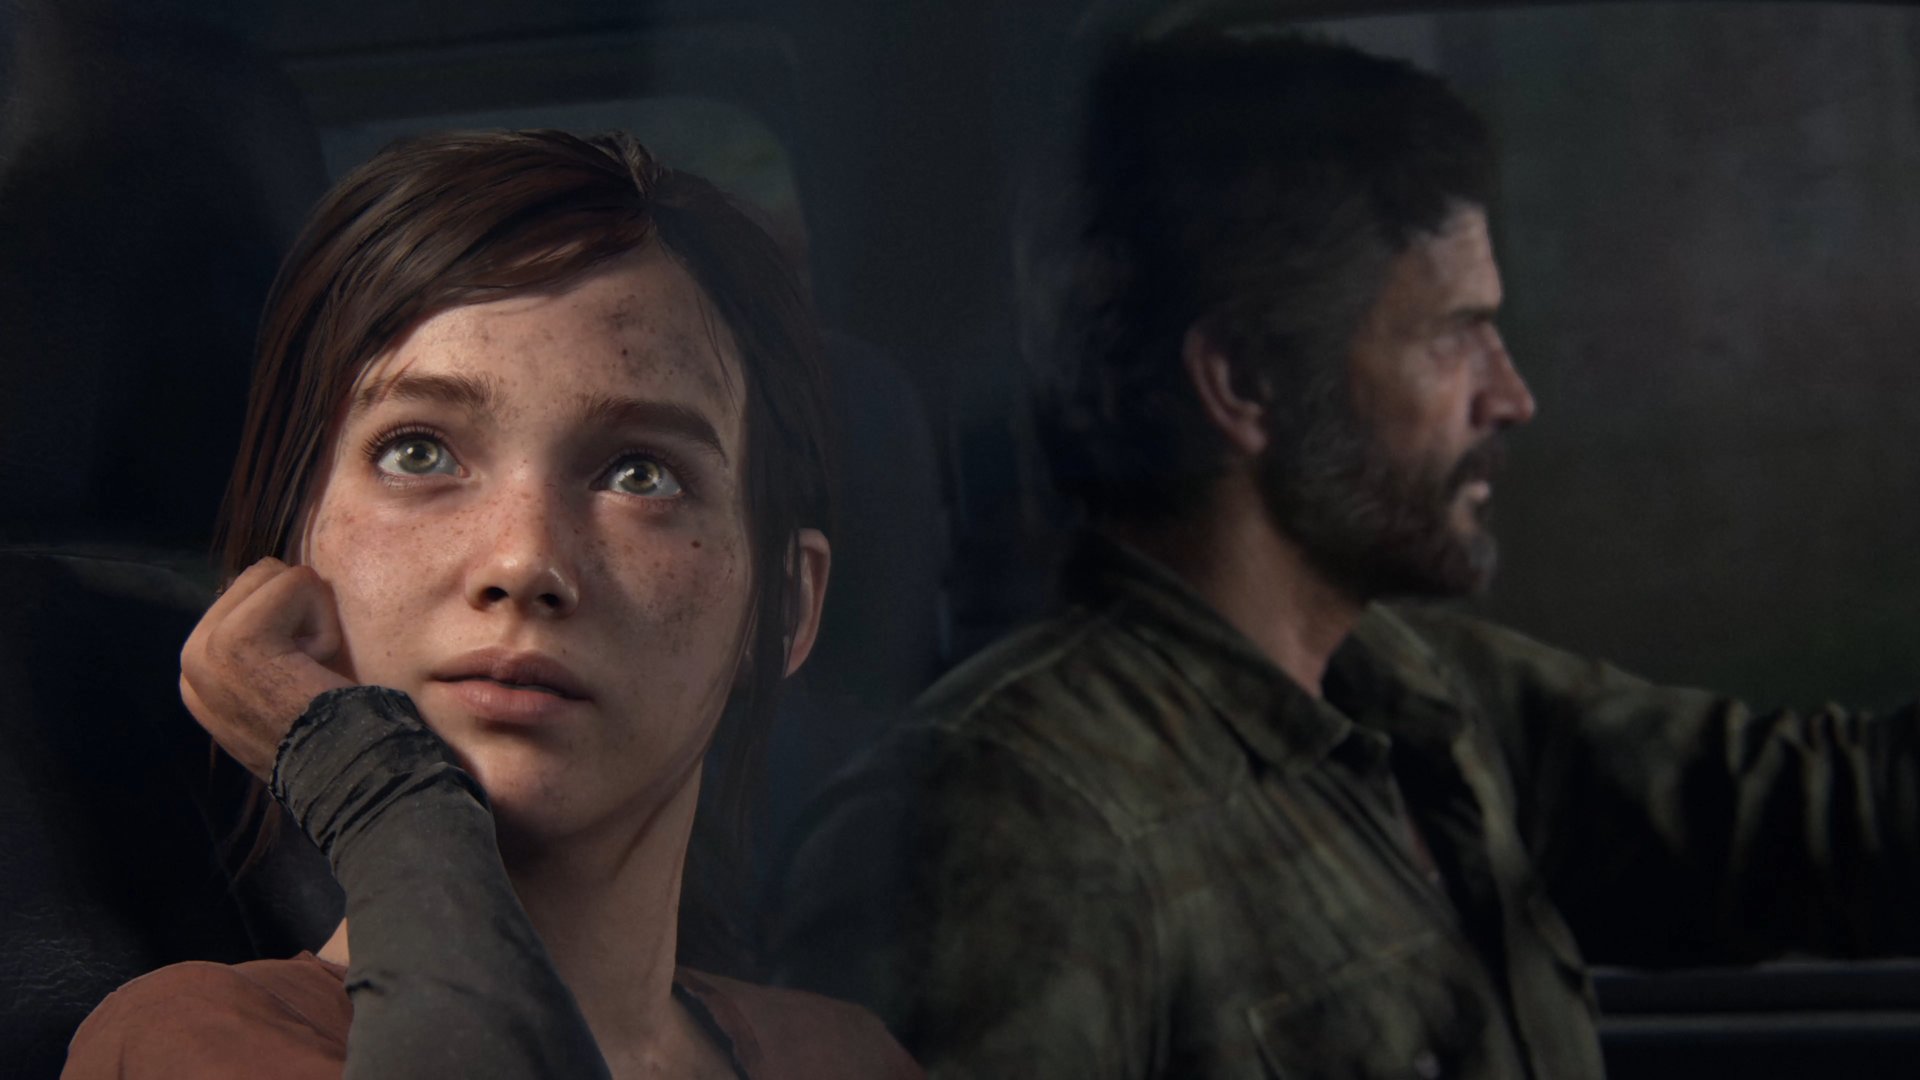 The Last of Us: Part I